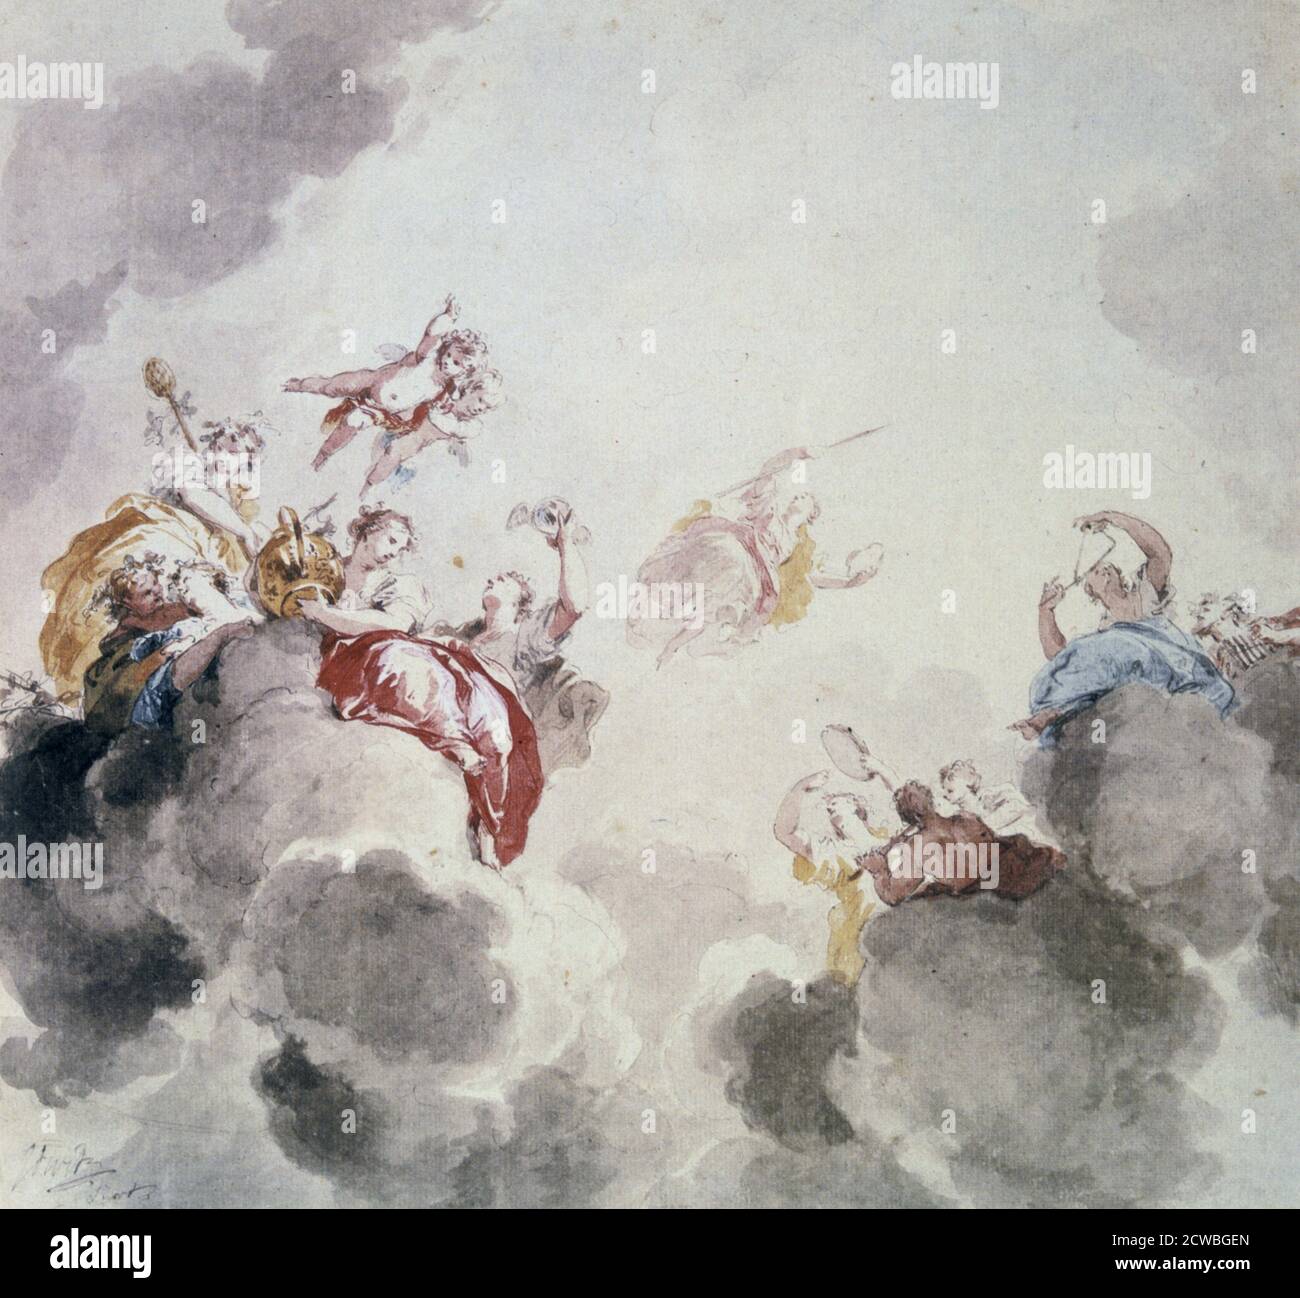 Heavenly scene by jacob de wit, allegorical painting on a ceiling 18th century. Stock Photo